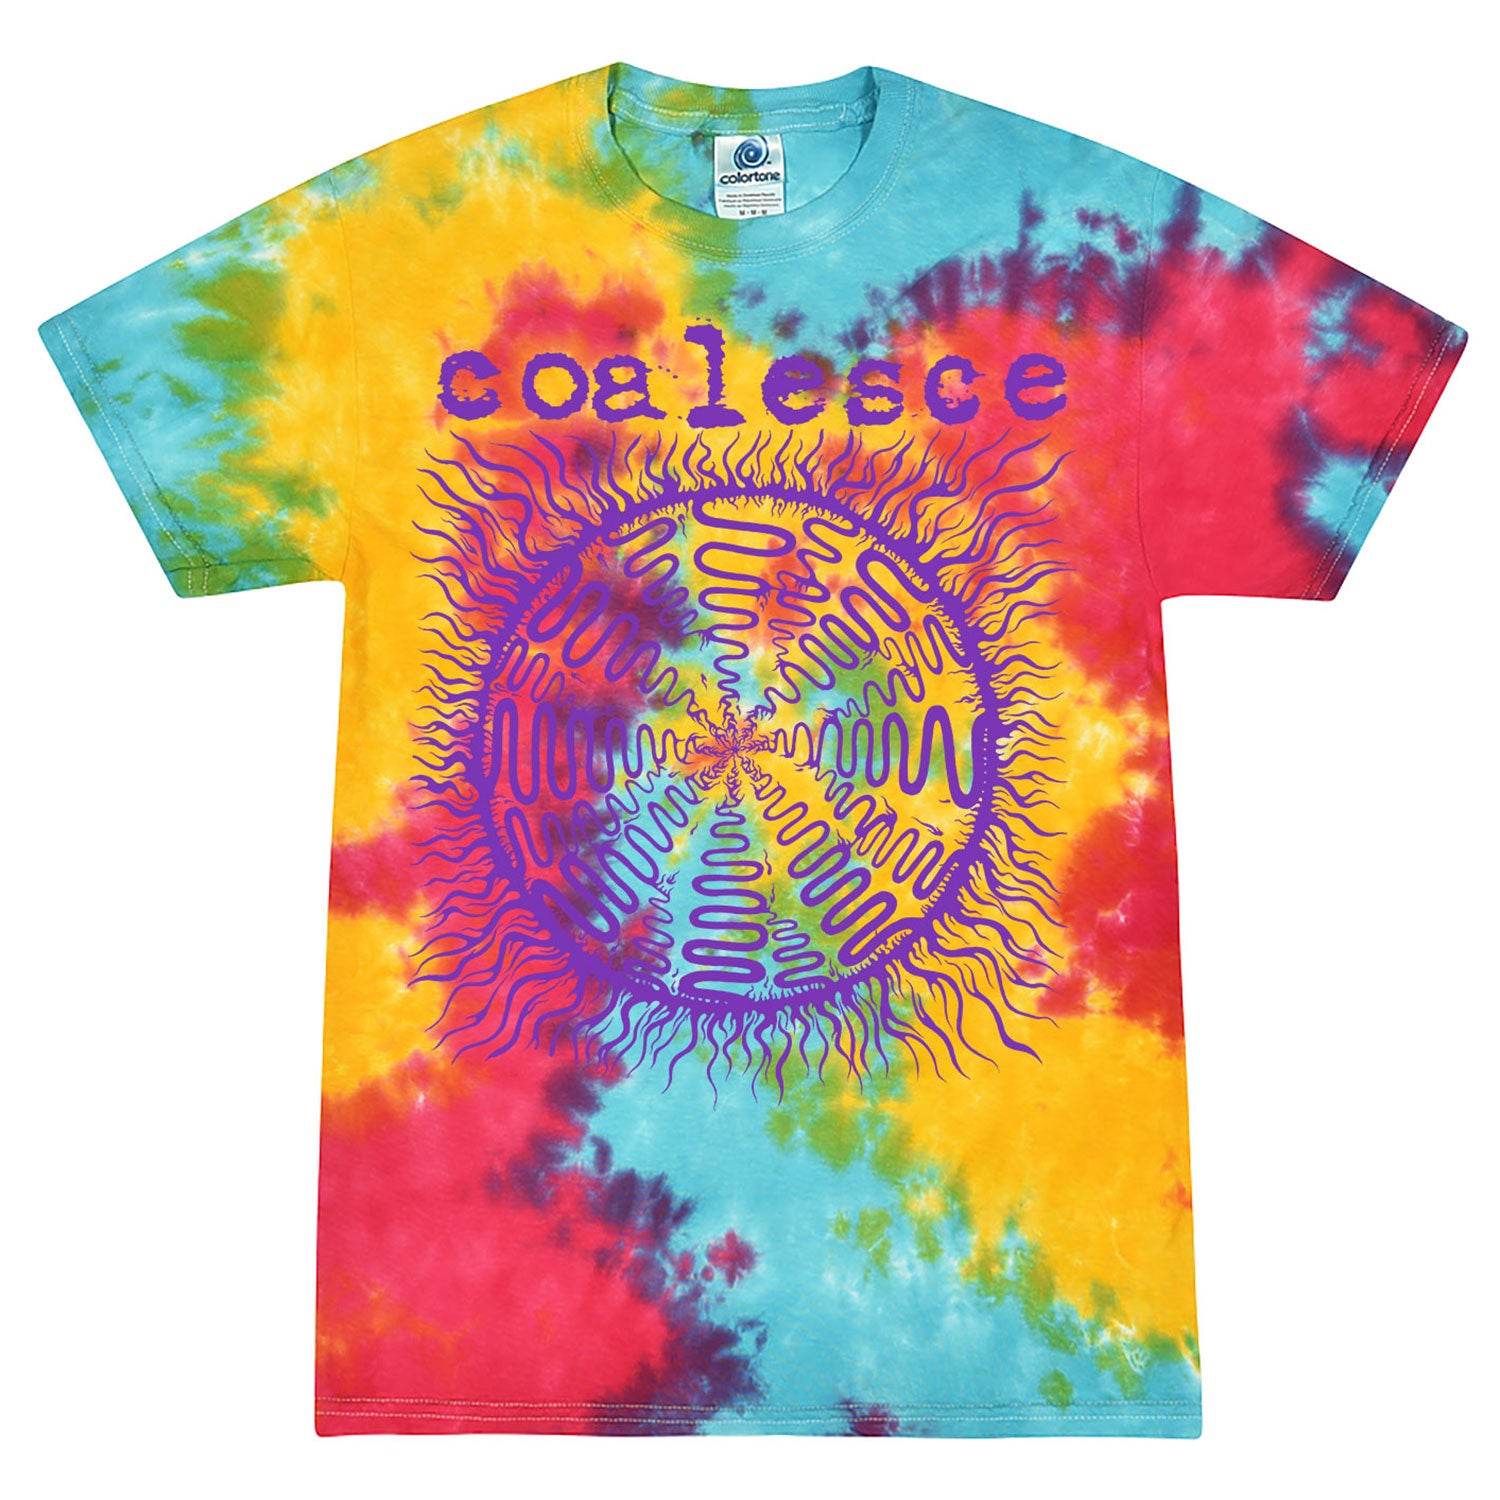 Coalesce "There Is Nothing New Under The Sun (Tie Dye)" T-Shirt